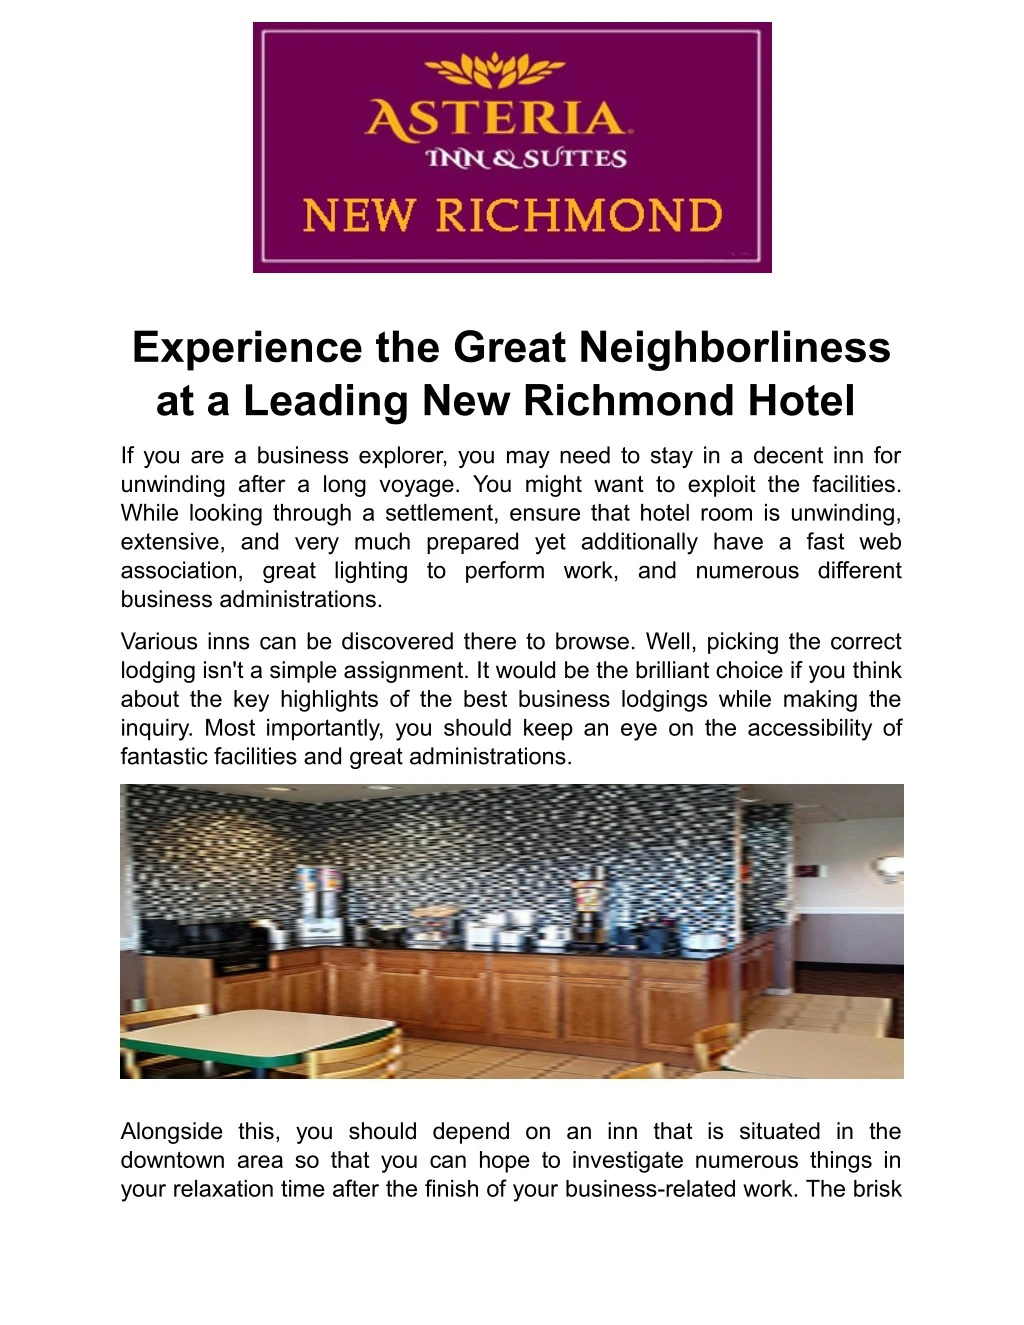 experience the great neighborliness at a leading